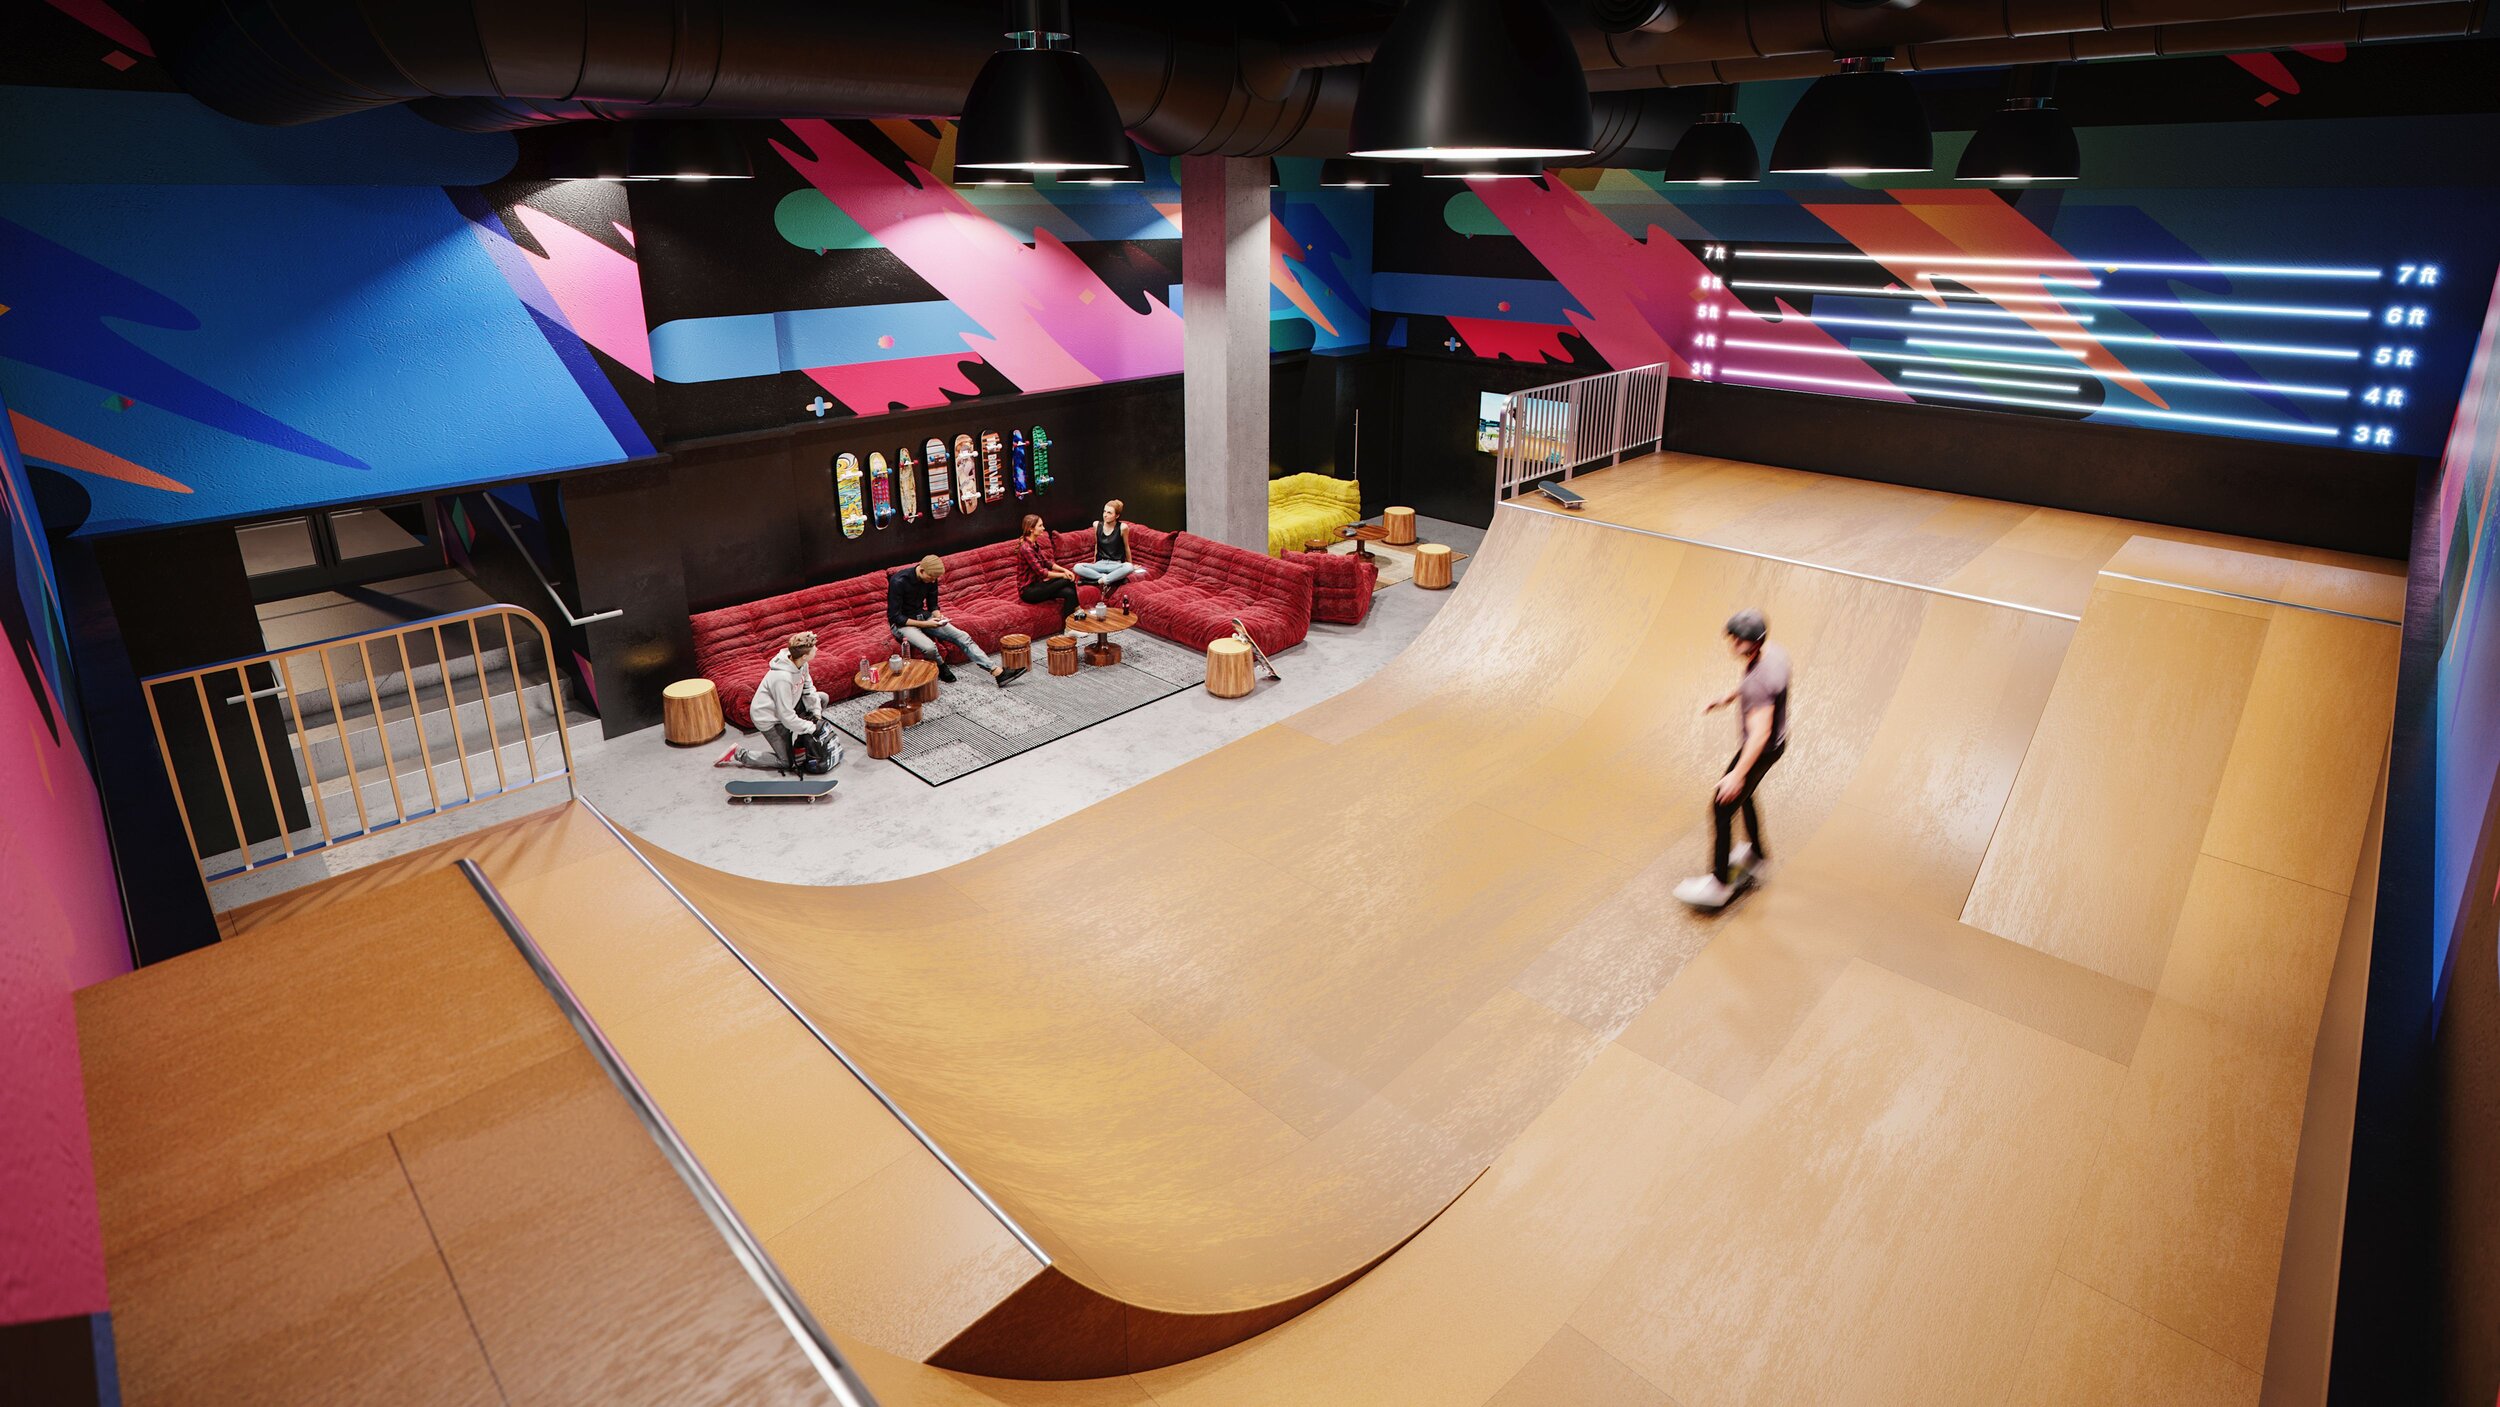   Skateboarding   The newest Olympic sport is captivating audiences across the world this summer. Inspired residents of GID Development Group's  Waterline Square  can try out the tricks they see on TV at the development's indoor skate park, the first